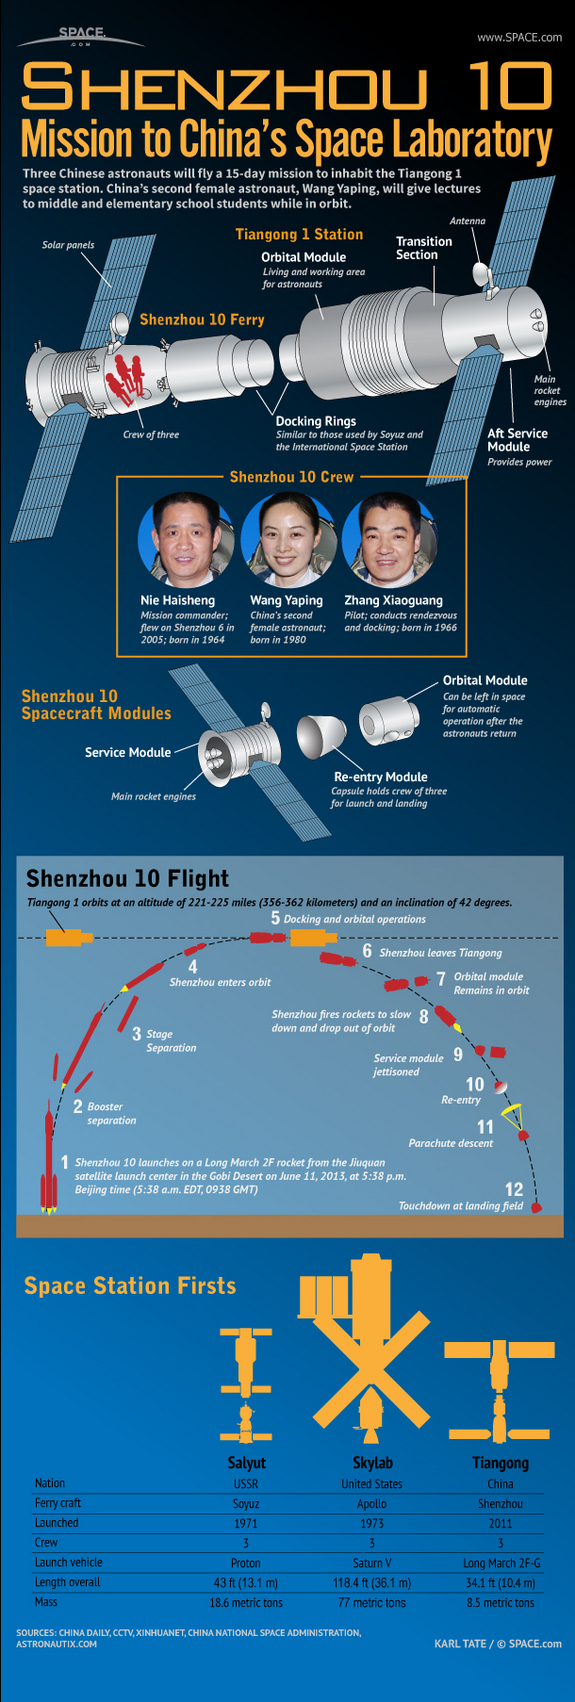 Find out how the Chinese Shenzhou 10 manned space flight works in this SPACE.com infographic.